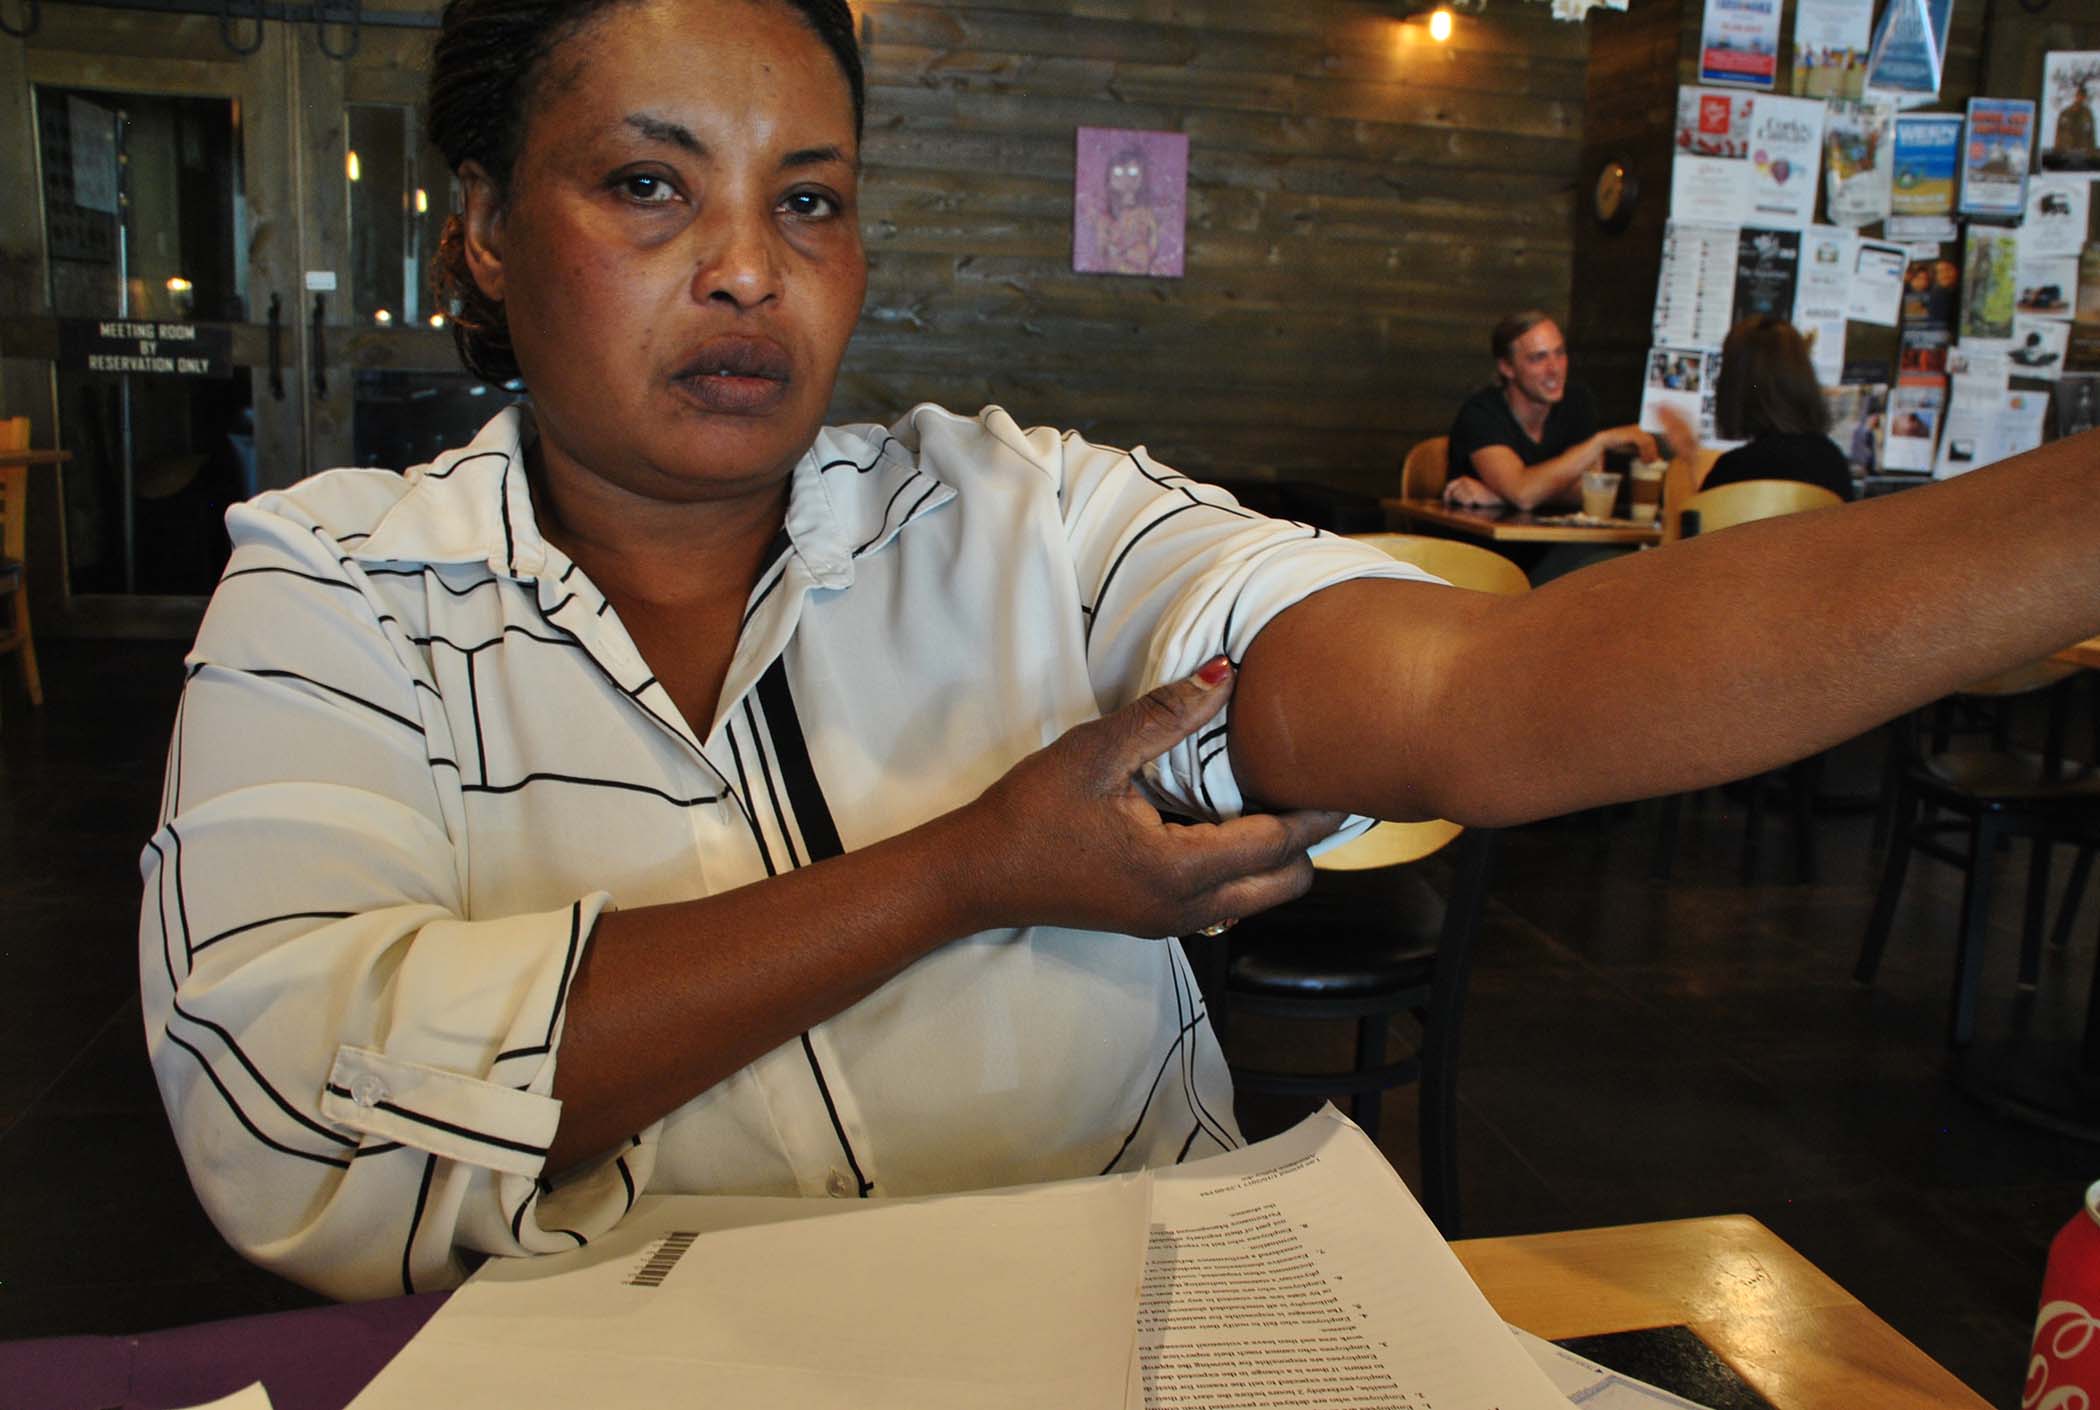 Halima Kwcrwb shows her arm where she says it was sprained last year - photo by C.S. Hagen